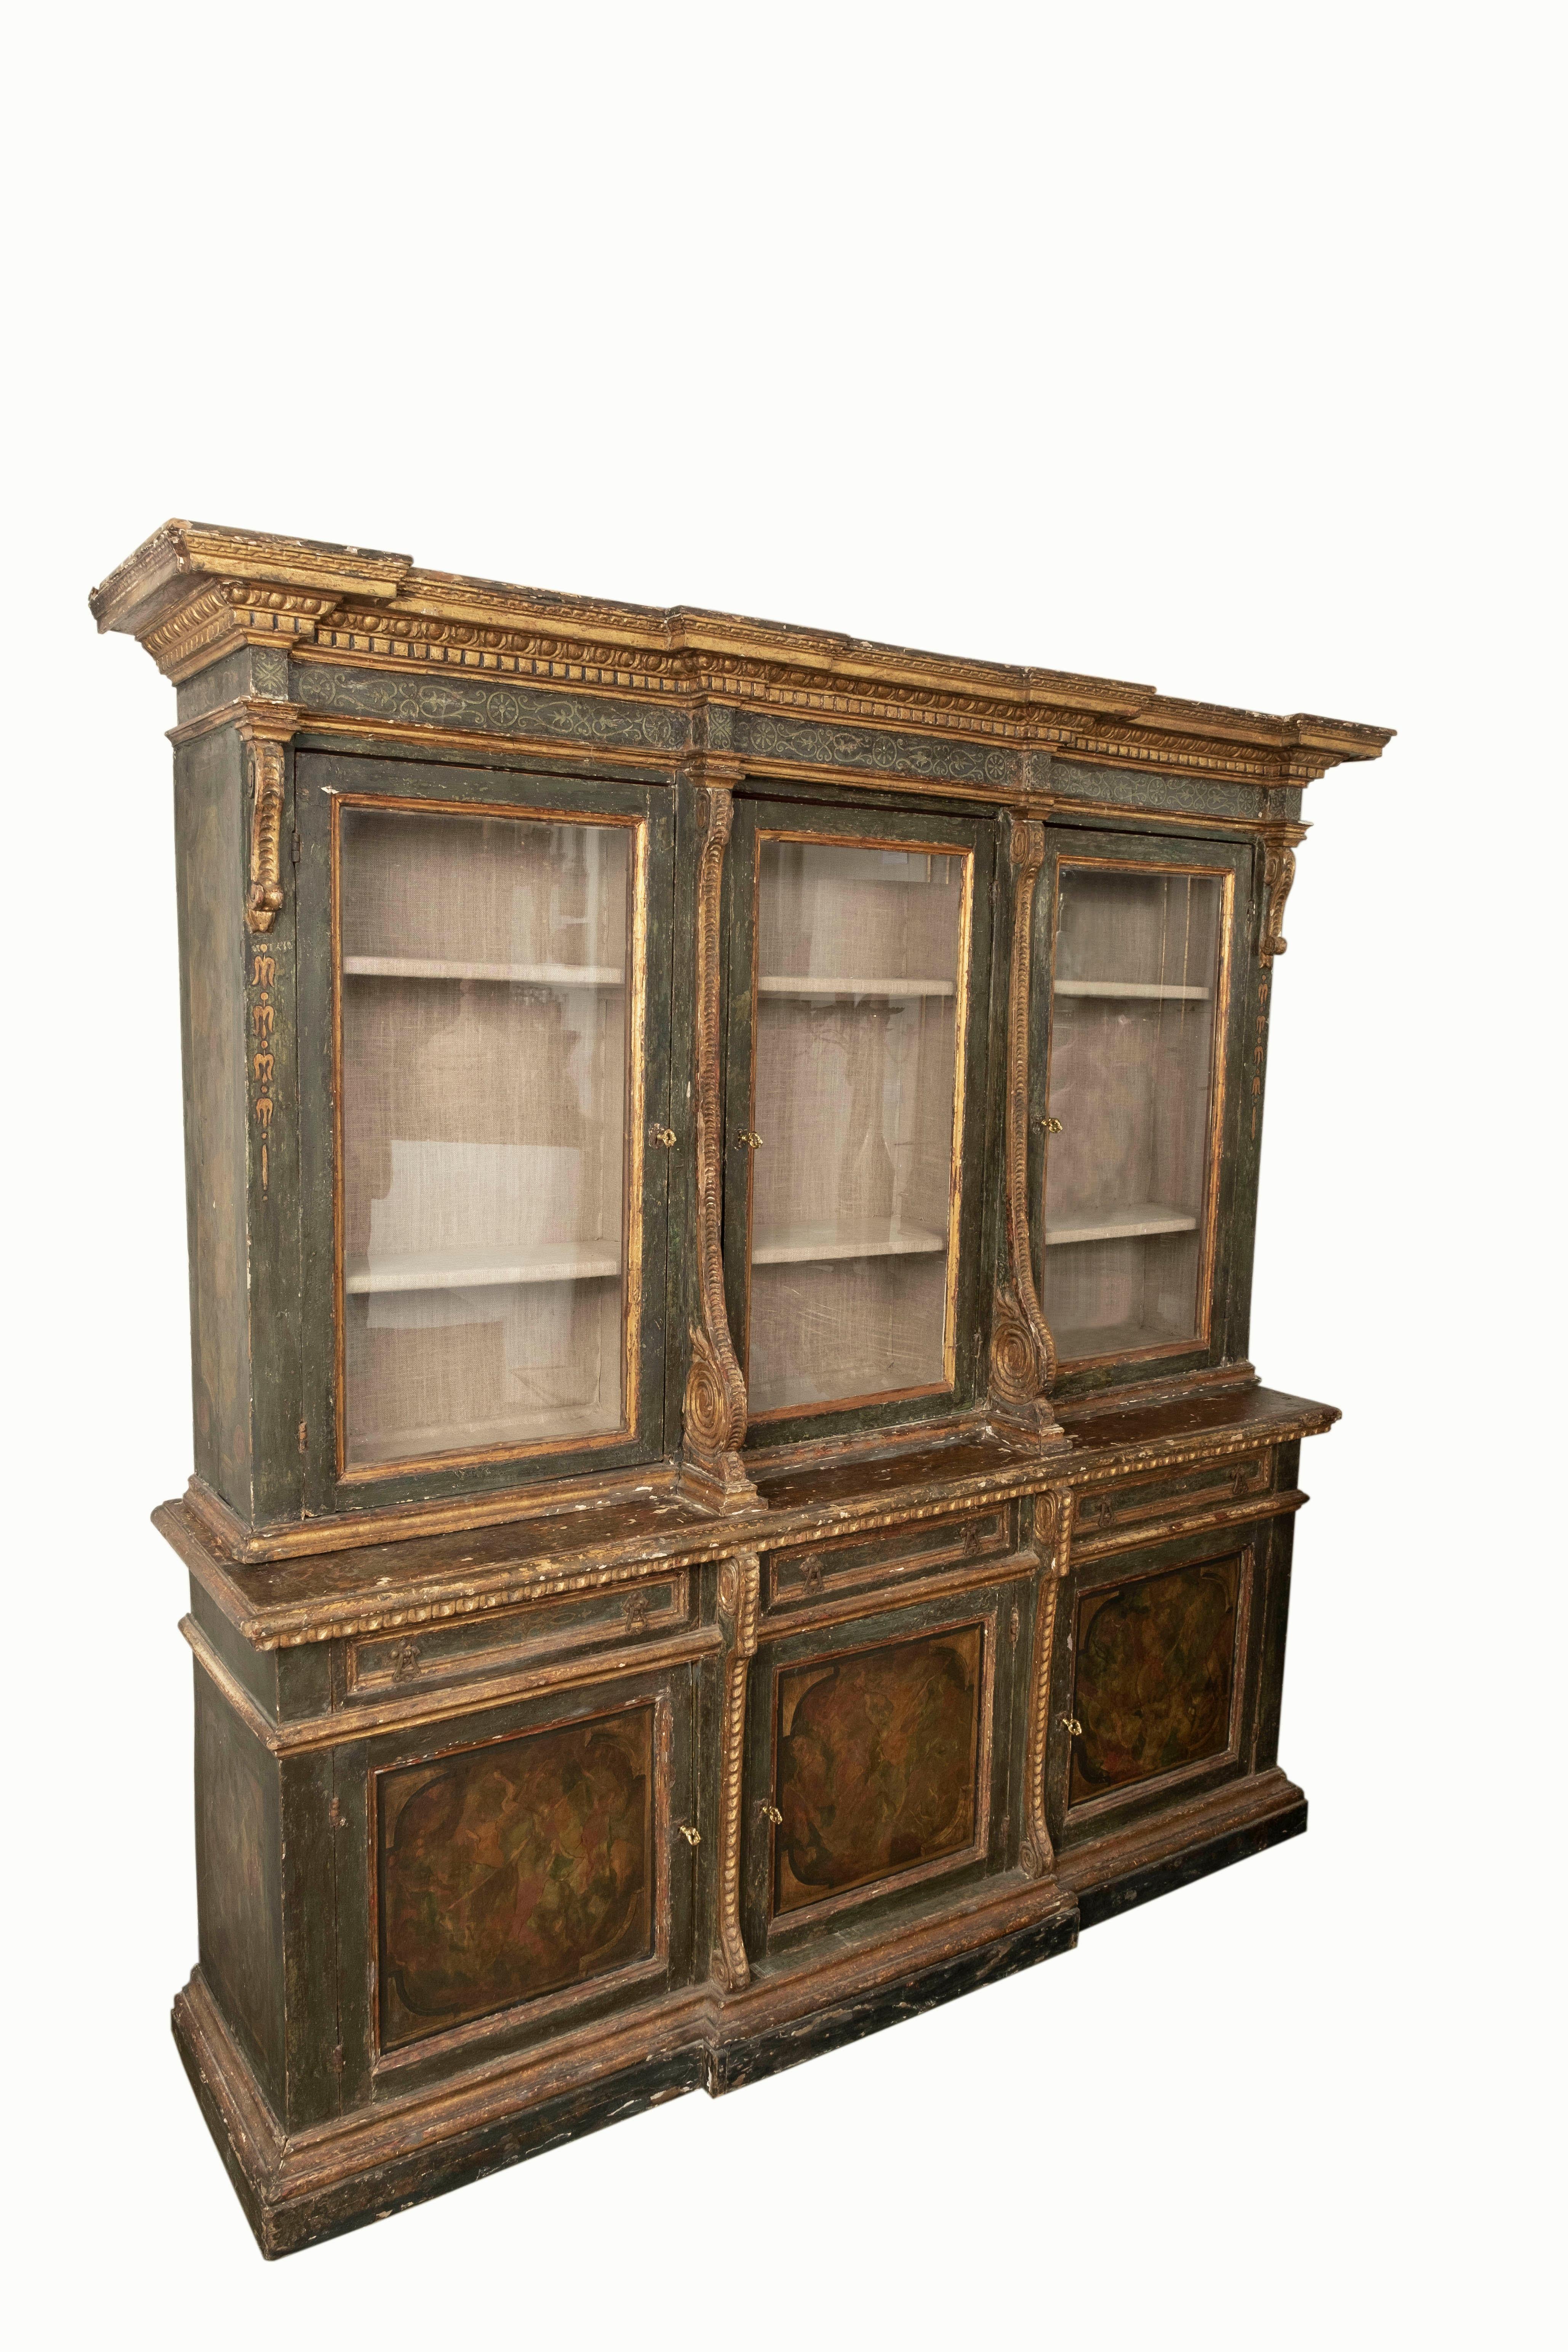 Italian Bookcase, 18th Century Painted And Parcel Gilt.
This stunning 18th century Baroque painted and parcel gilt bookcase has 3 glass cabinet doors above for display, 3 drawers below and 3 wood cabinet doors at the bottom for storage.
The paint